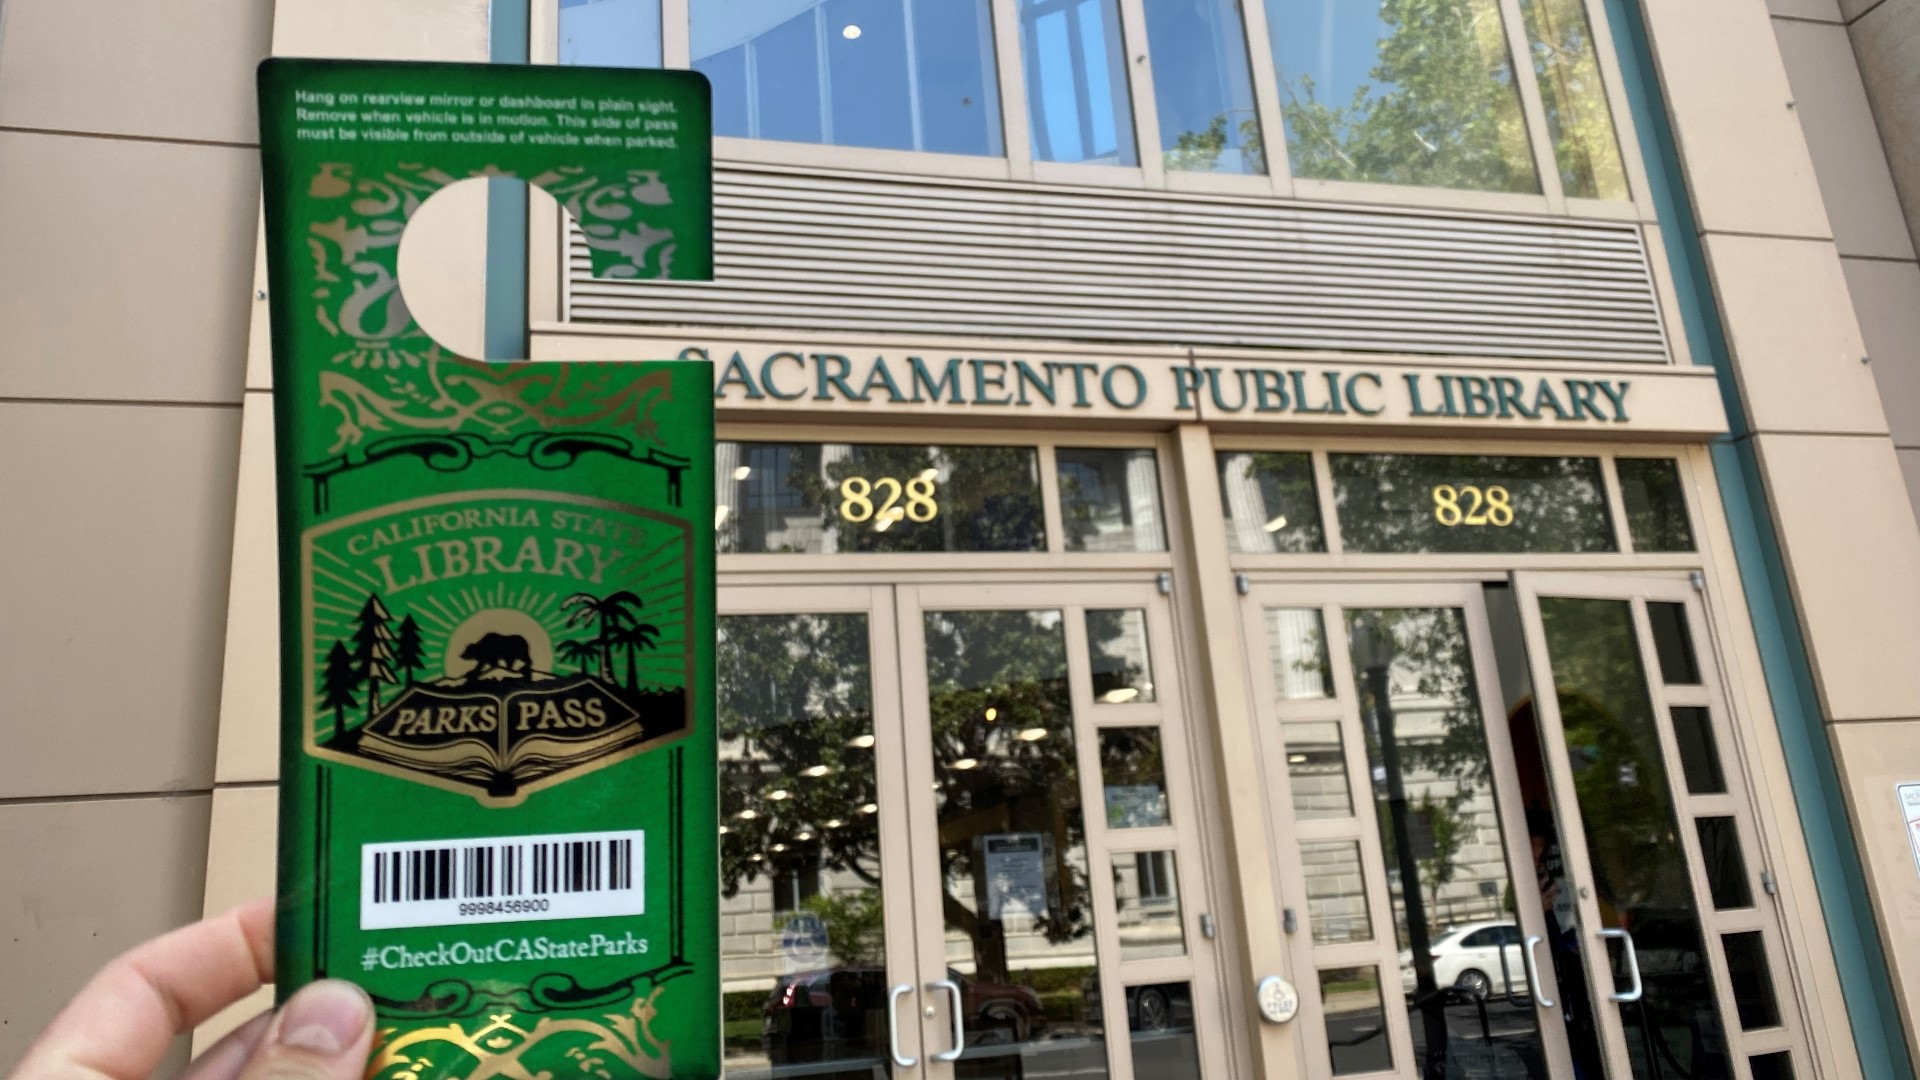 The new pass being distributed at local libraries will allow free vehicle day use entry at more than 200 state parks in California.